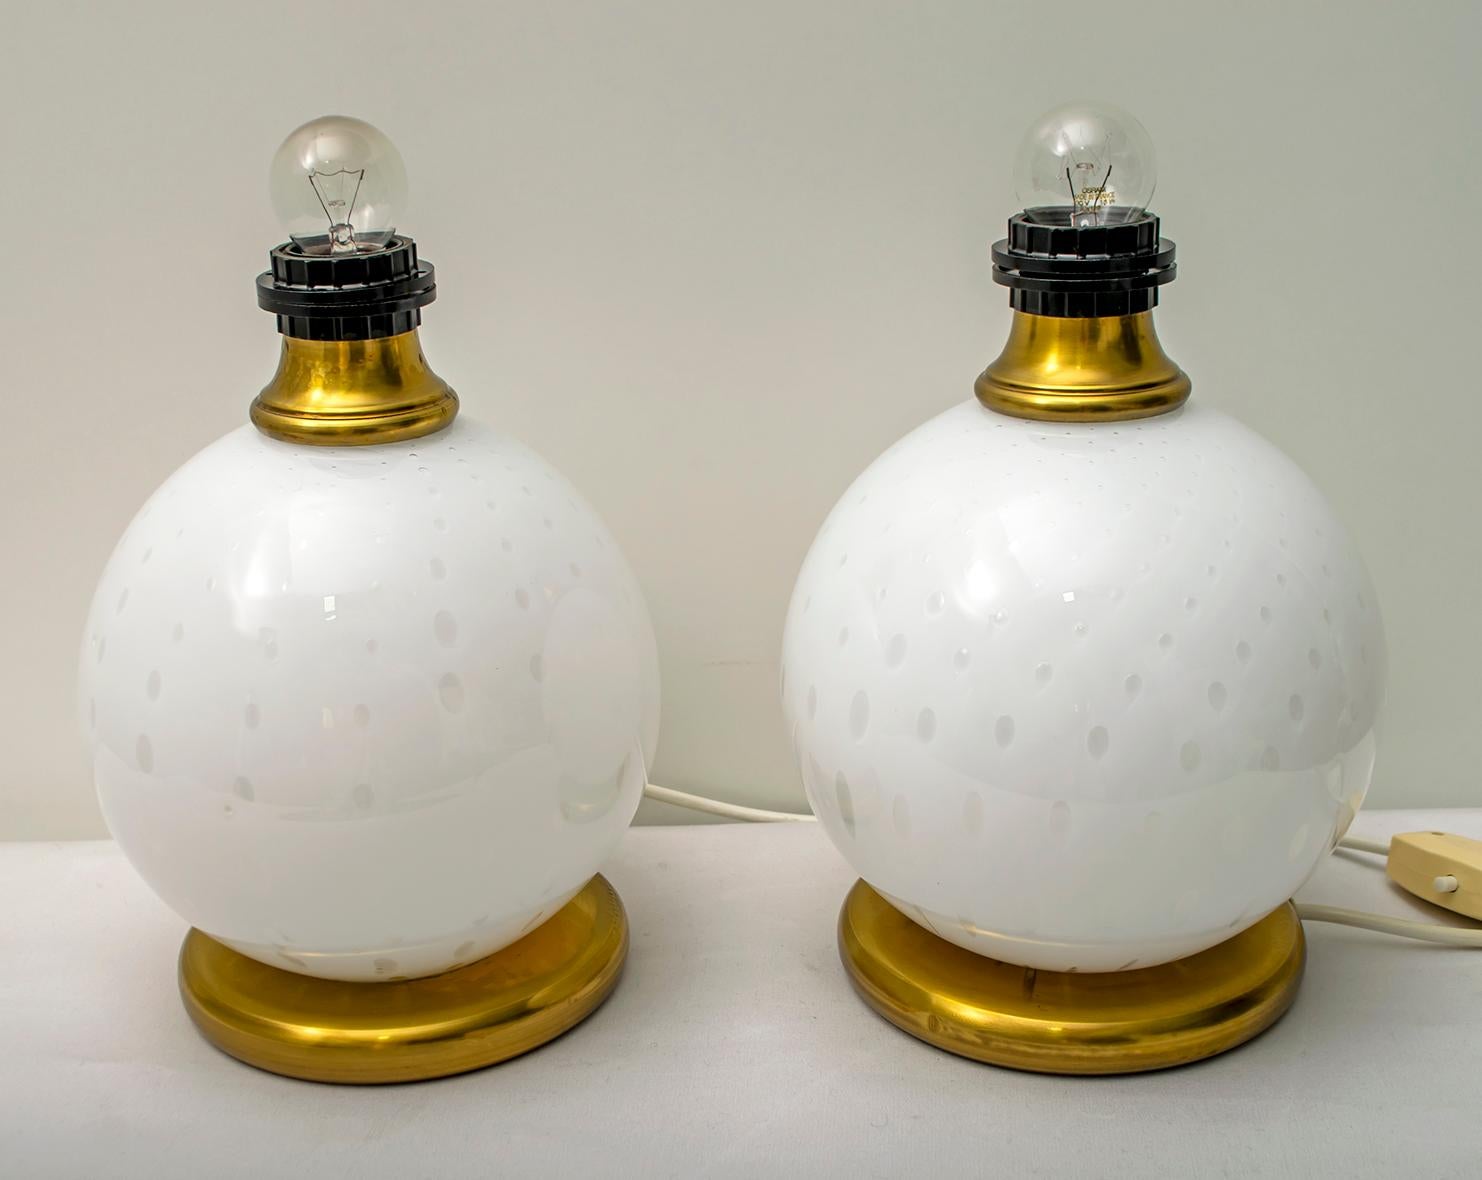 This pair of lamps was created by Maestri Muranesi, with the blown glass technique with air bubbles, the two supports are made of brass, there are no lampshades (as in the photo). Italy, 1970s.
 